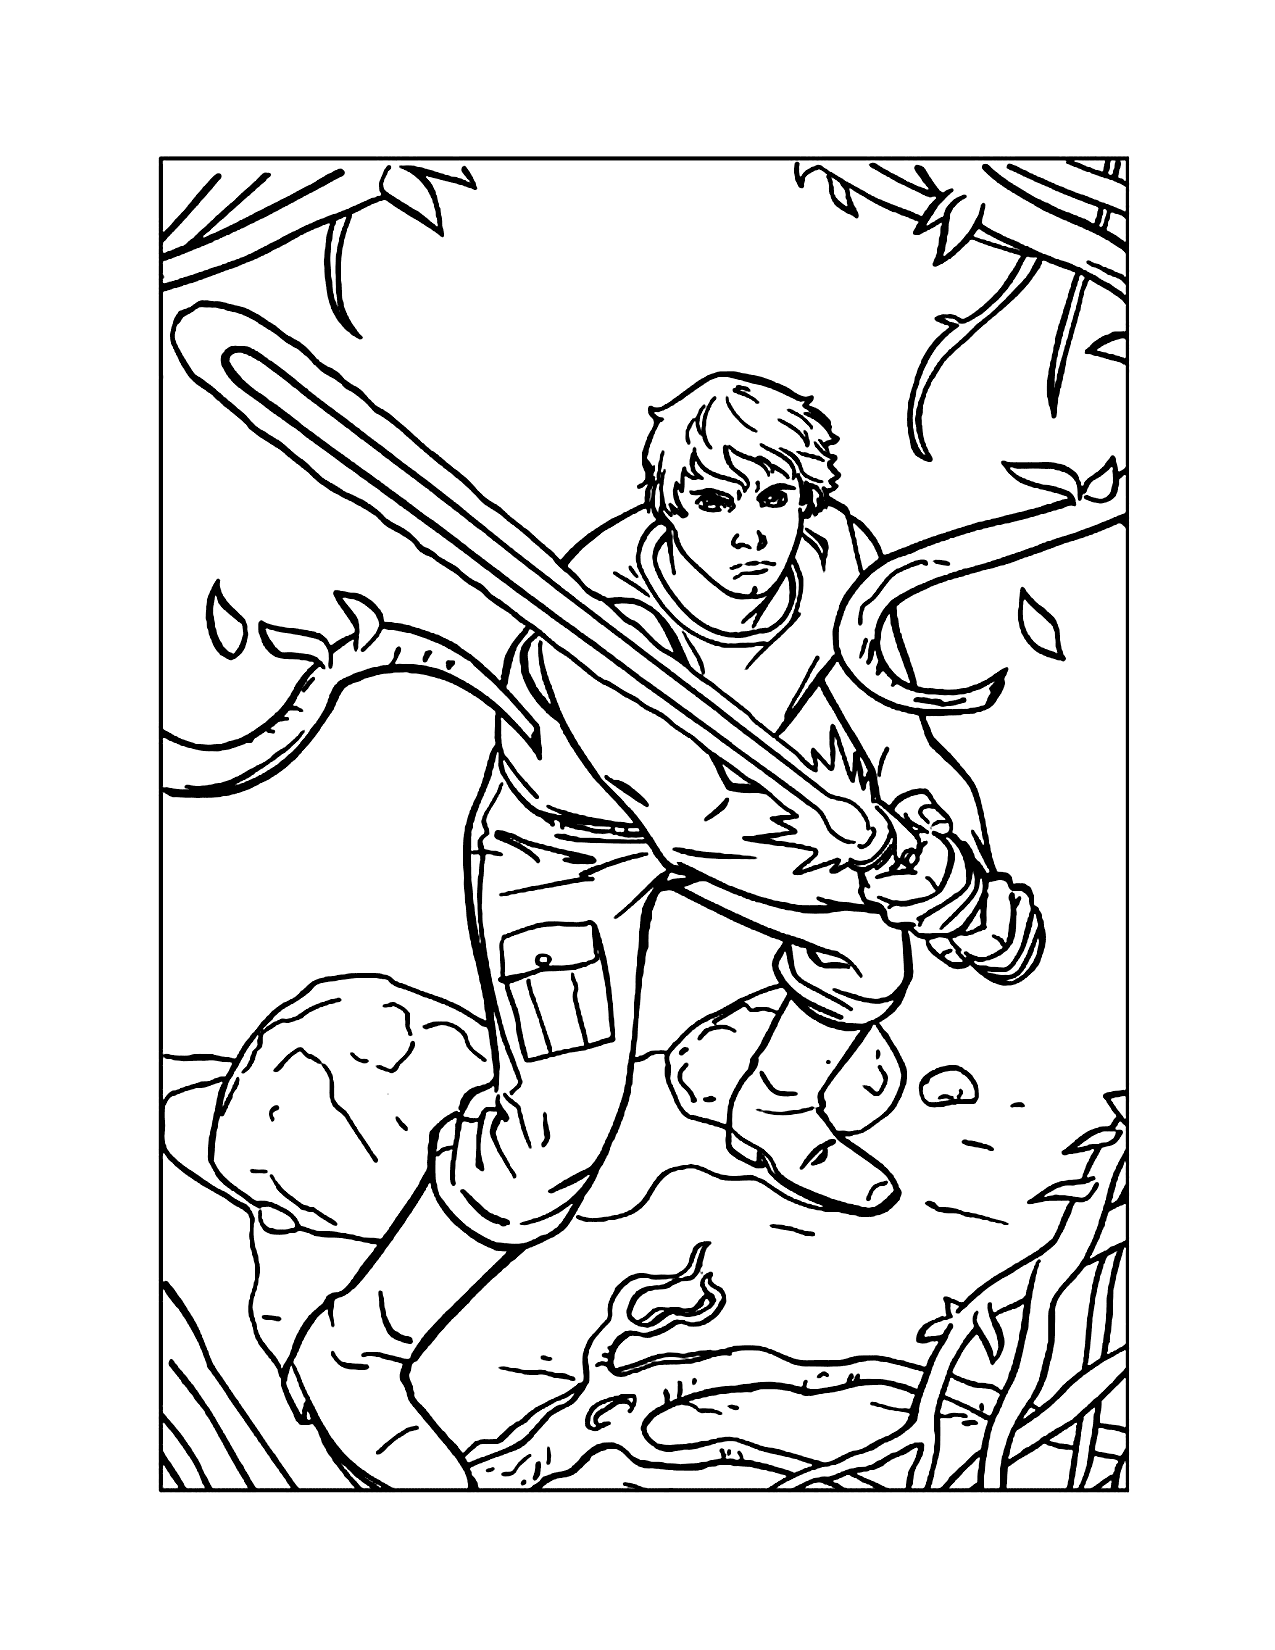 Luke In The Swamp Star Wars Coloring Page